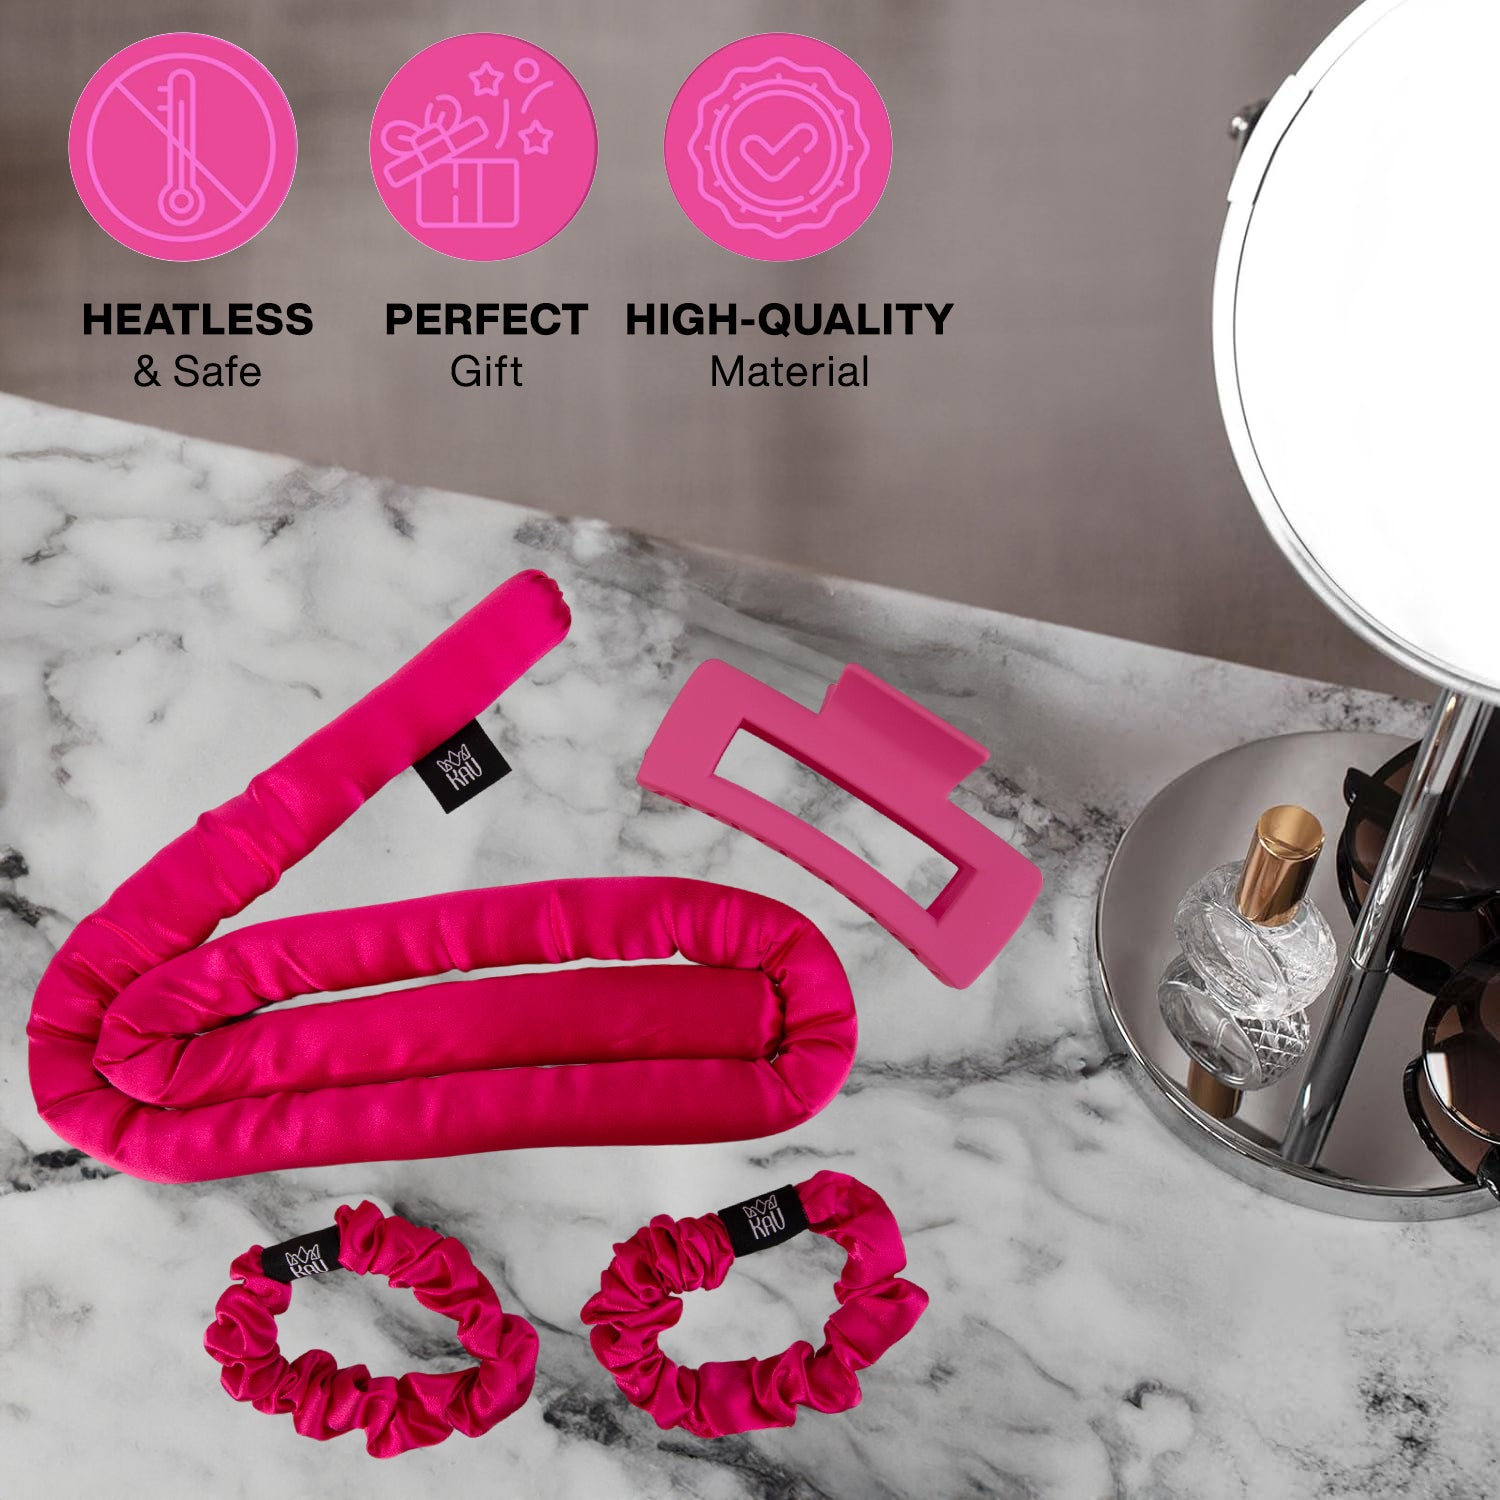 KAV Satin Heatless Curling Rod with Clip and Scrunchie Set, HOT PINK Satin Heatless Hair Curler, All Hair Types Overnight Curls